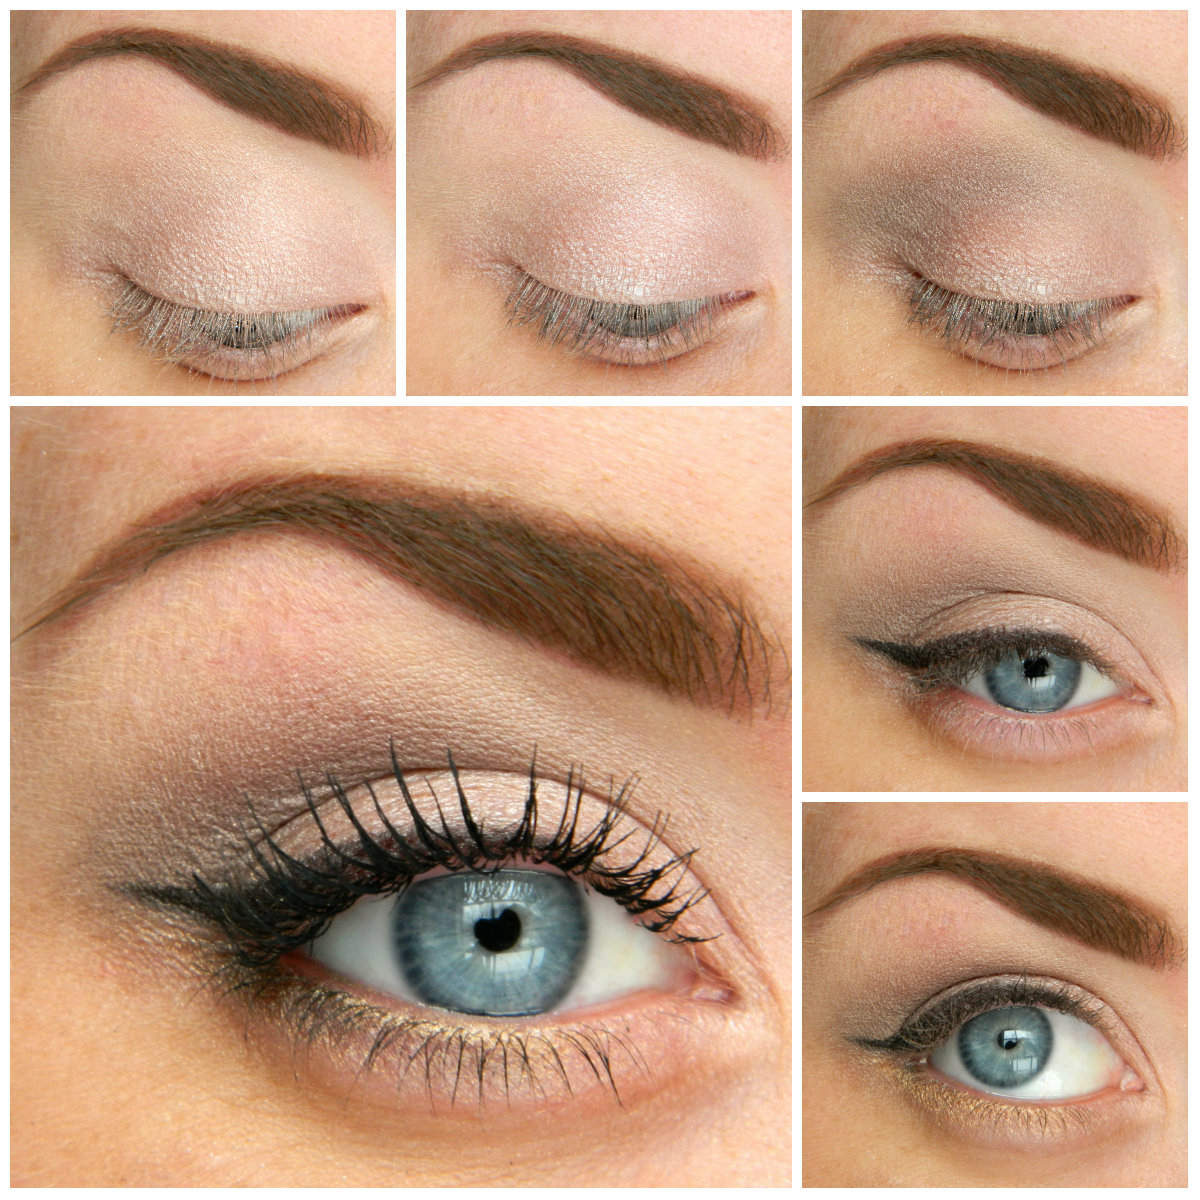 Fall Makeup For Blue Eyes 5 Ways To Make Blue Eyes Pop With Proper Eye Makeup Her Style Code